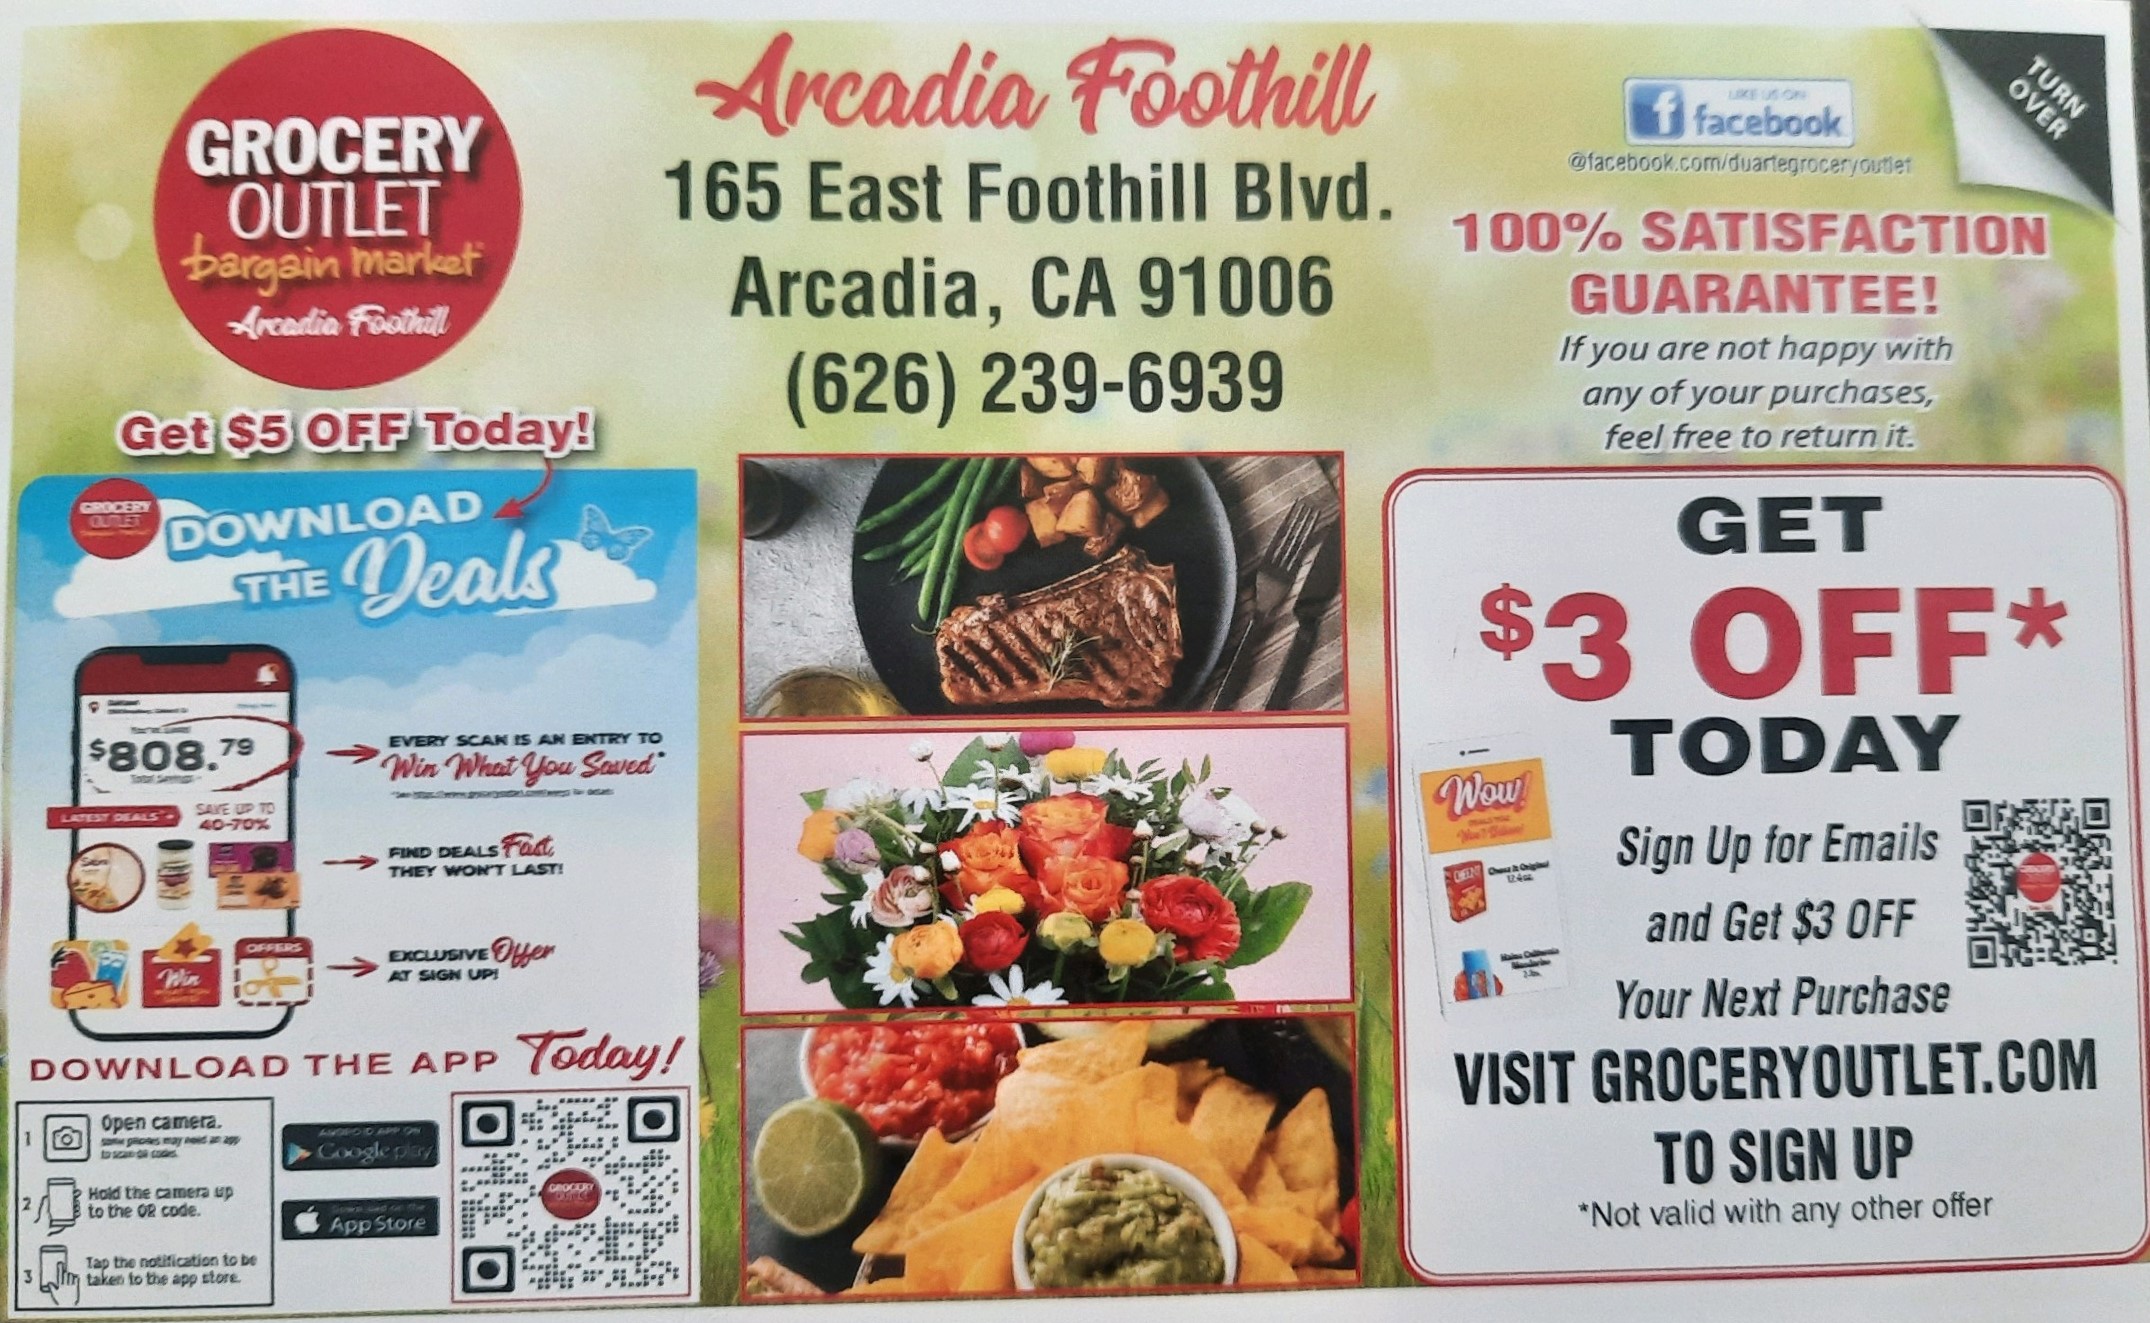 Grocery outlet Foothill current specials 